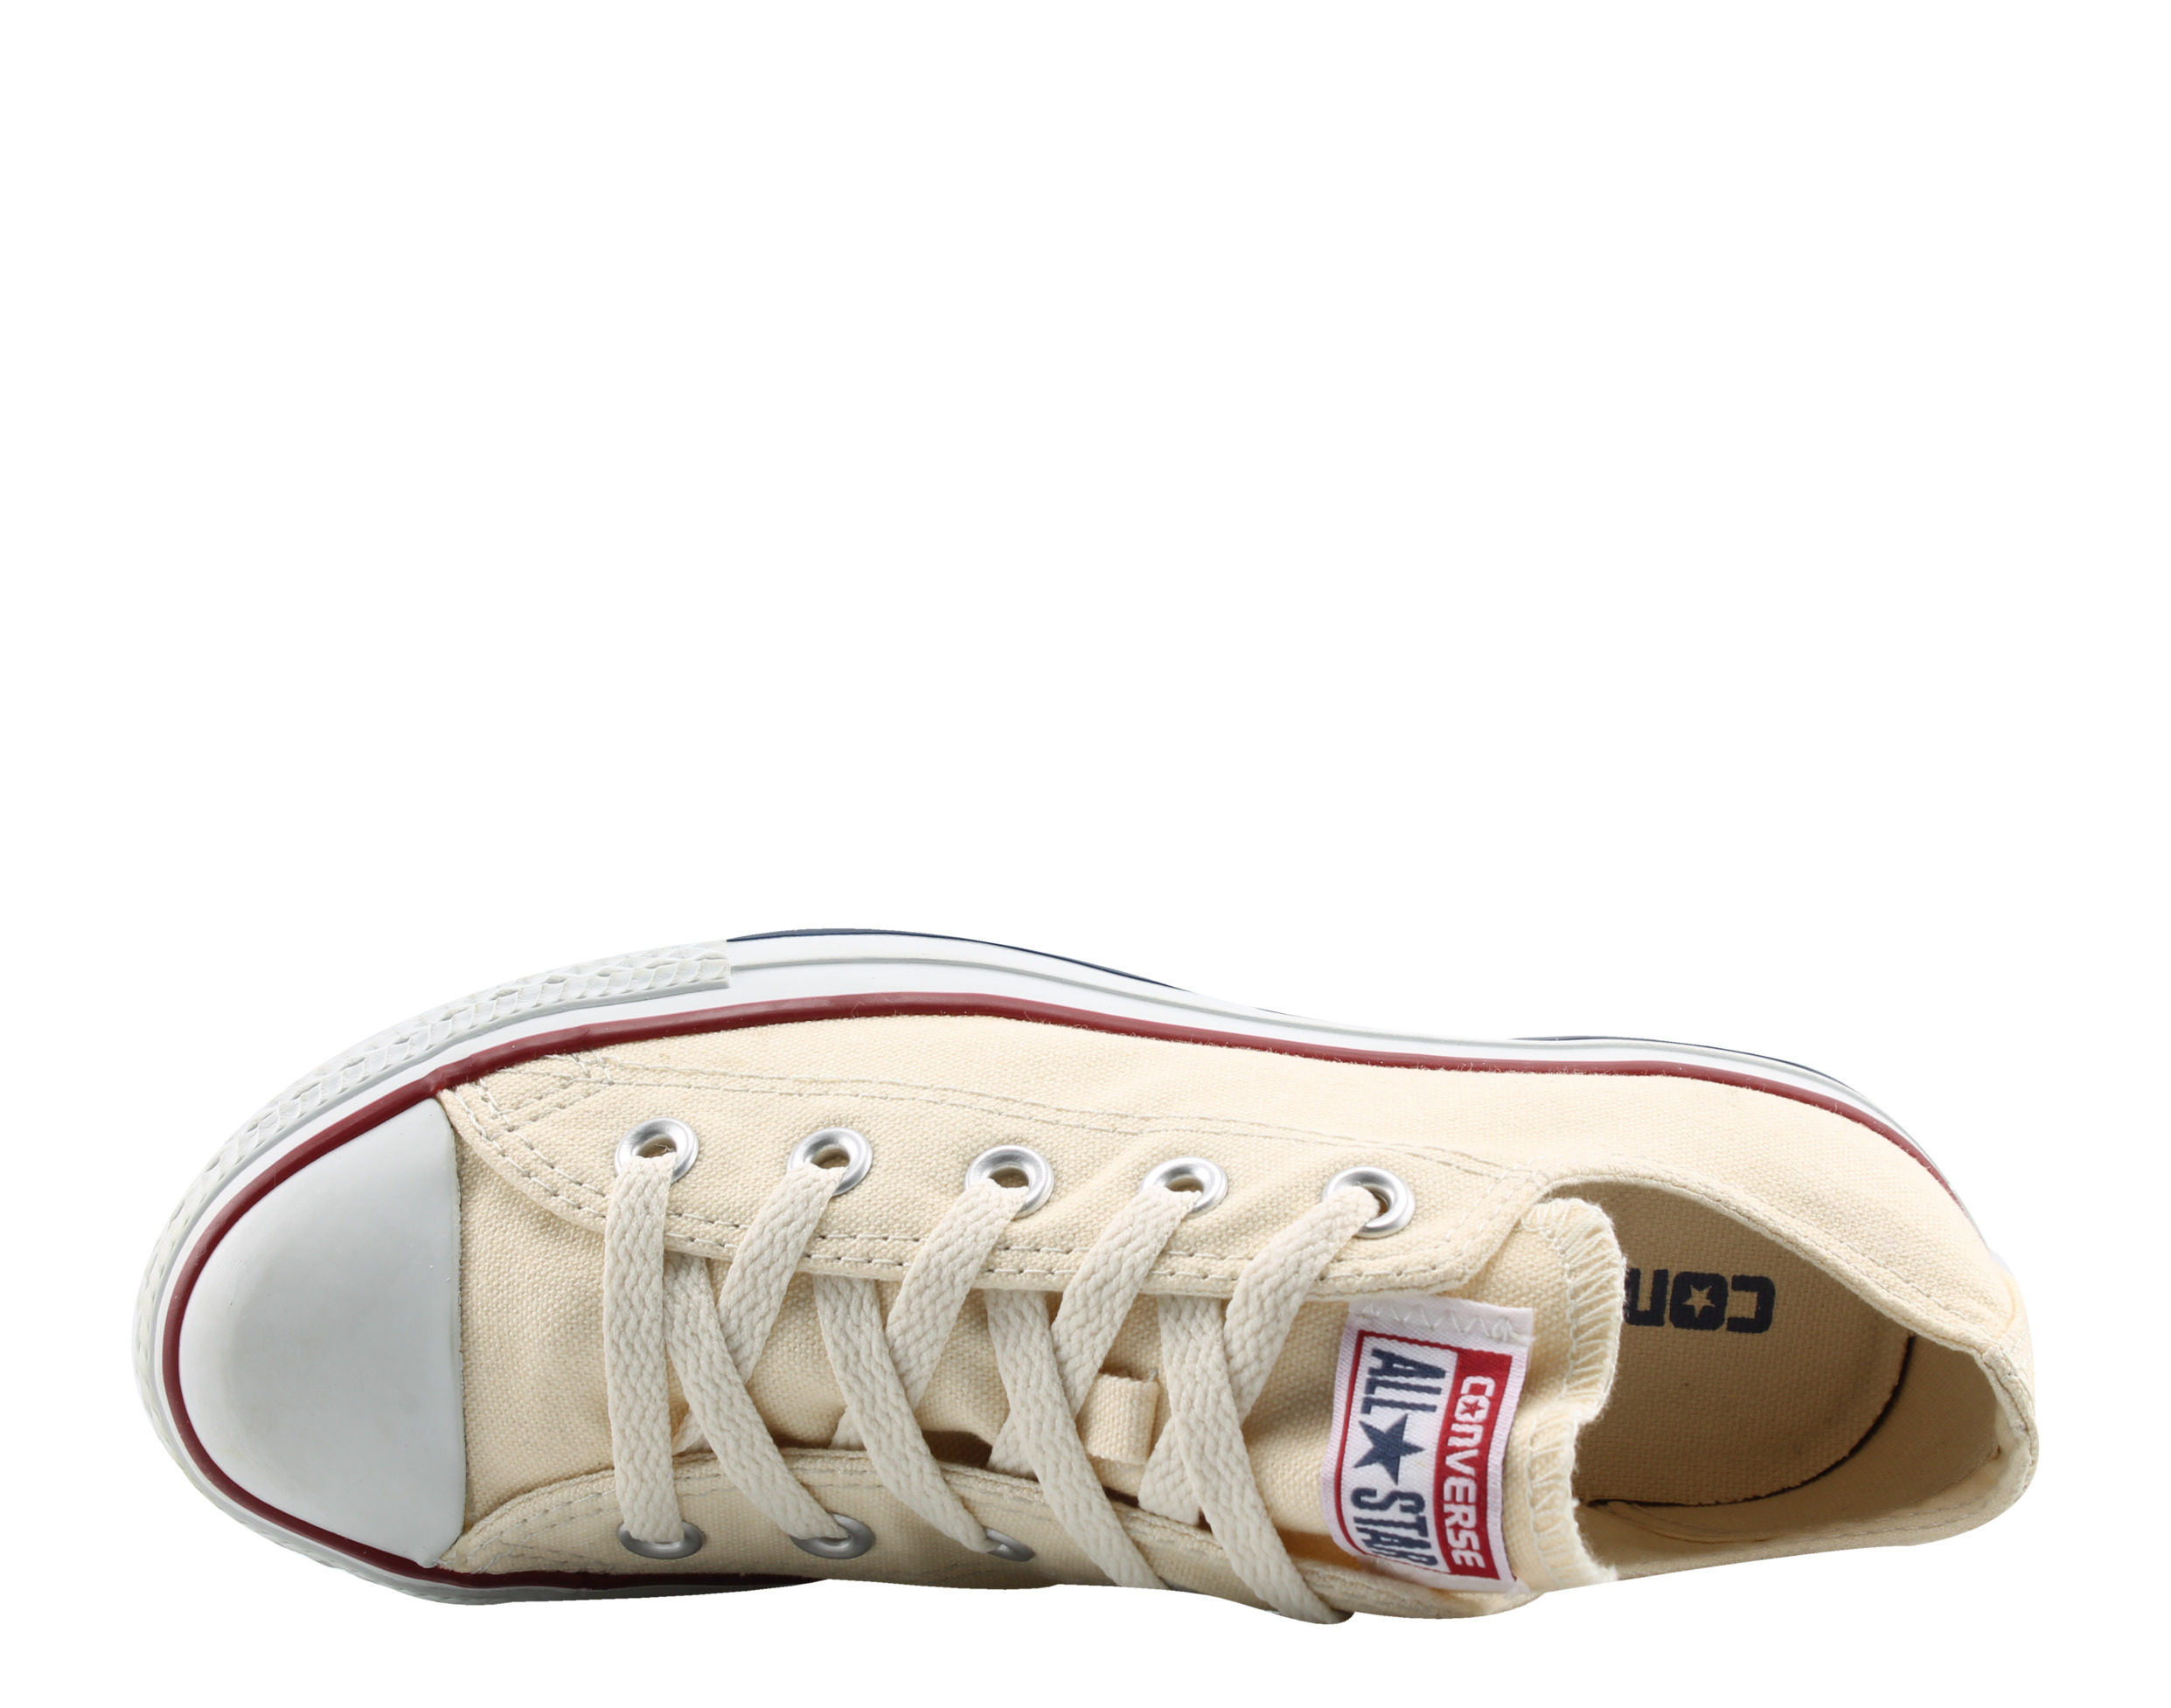 Converse Chuck Taylor OX All Star Big Kids Sneakers Unbleach White m9165 - image 4 of 6